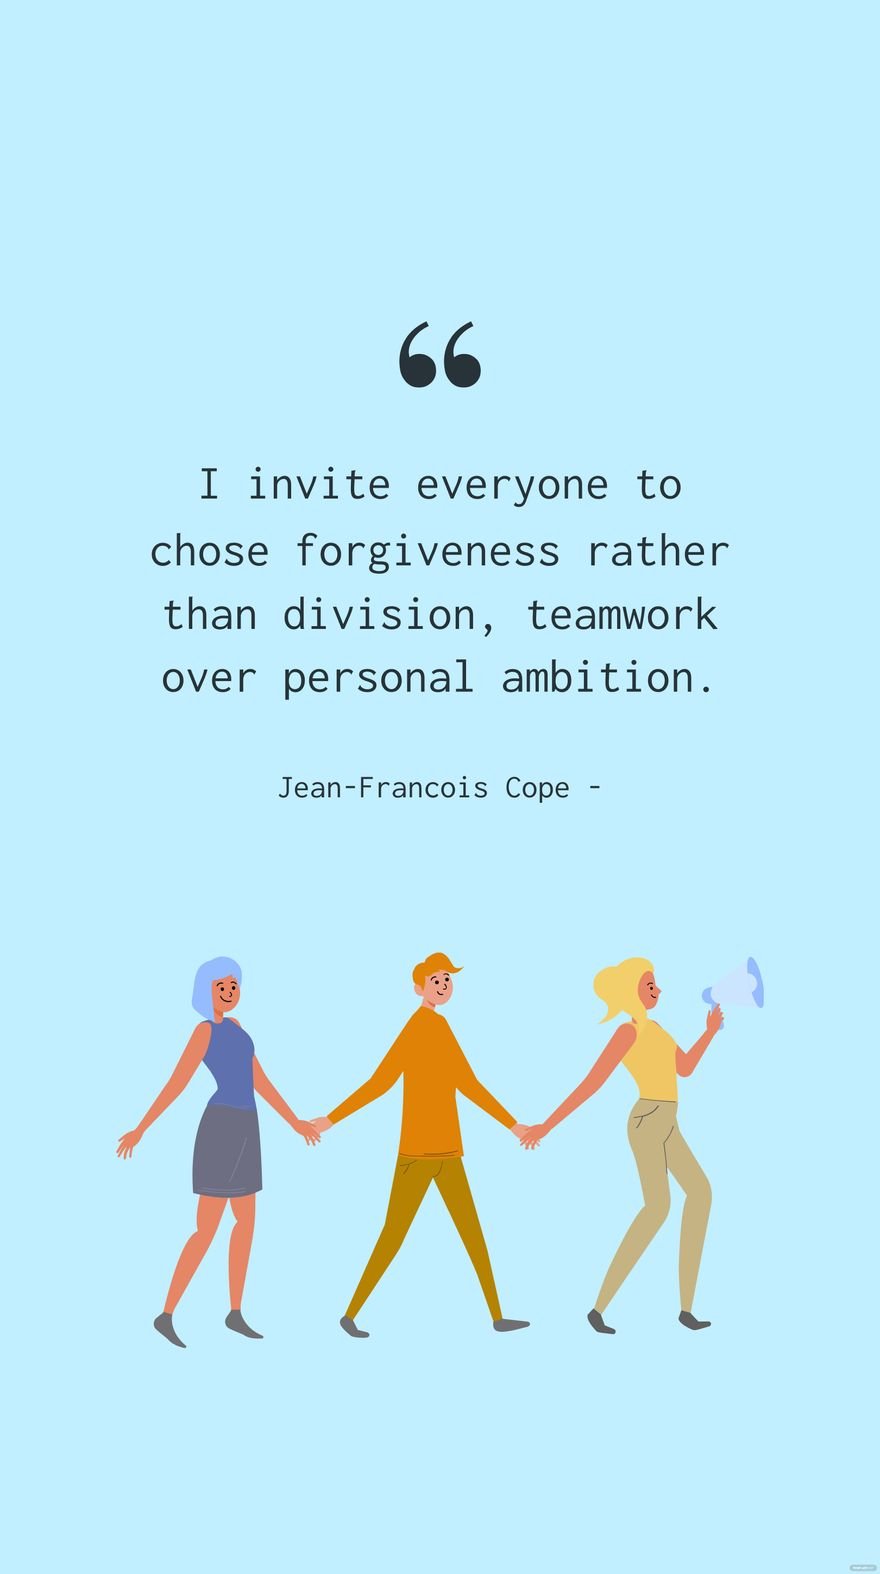 Jean-Francois Cope - I invite everyone to chose forgiveness rather than division, teamwork over personal ambition.